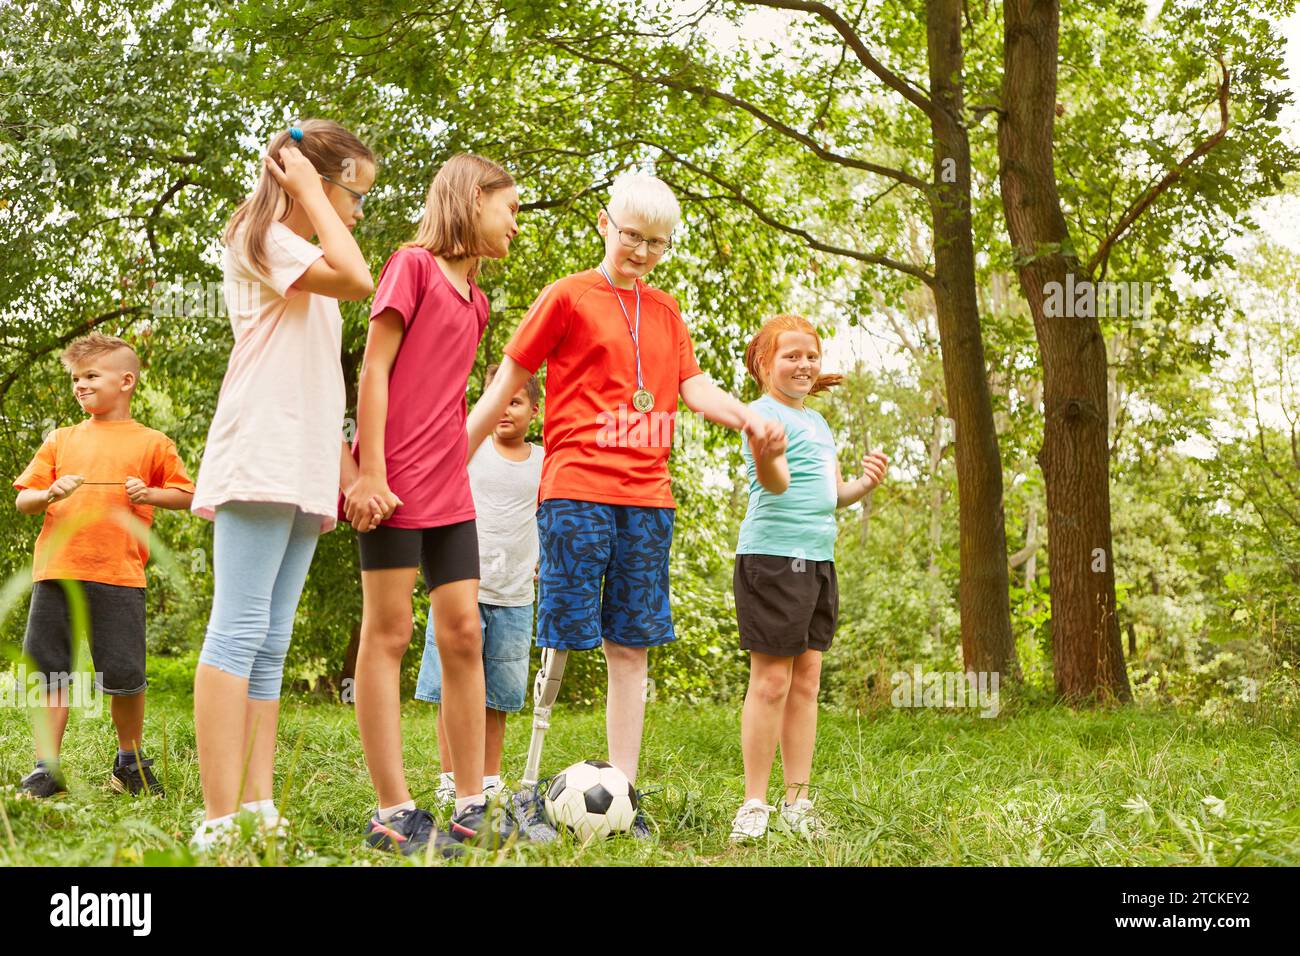 Disabled boy holding hands with friends while playing soccer at park Stock Photo